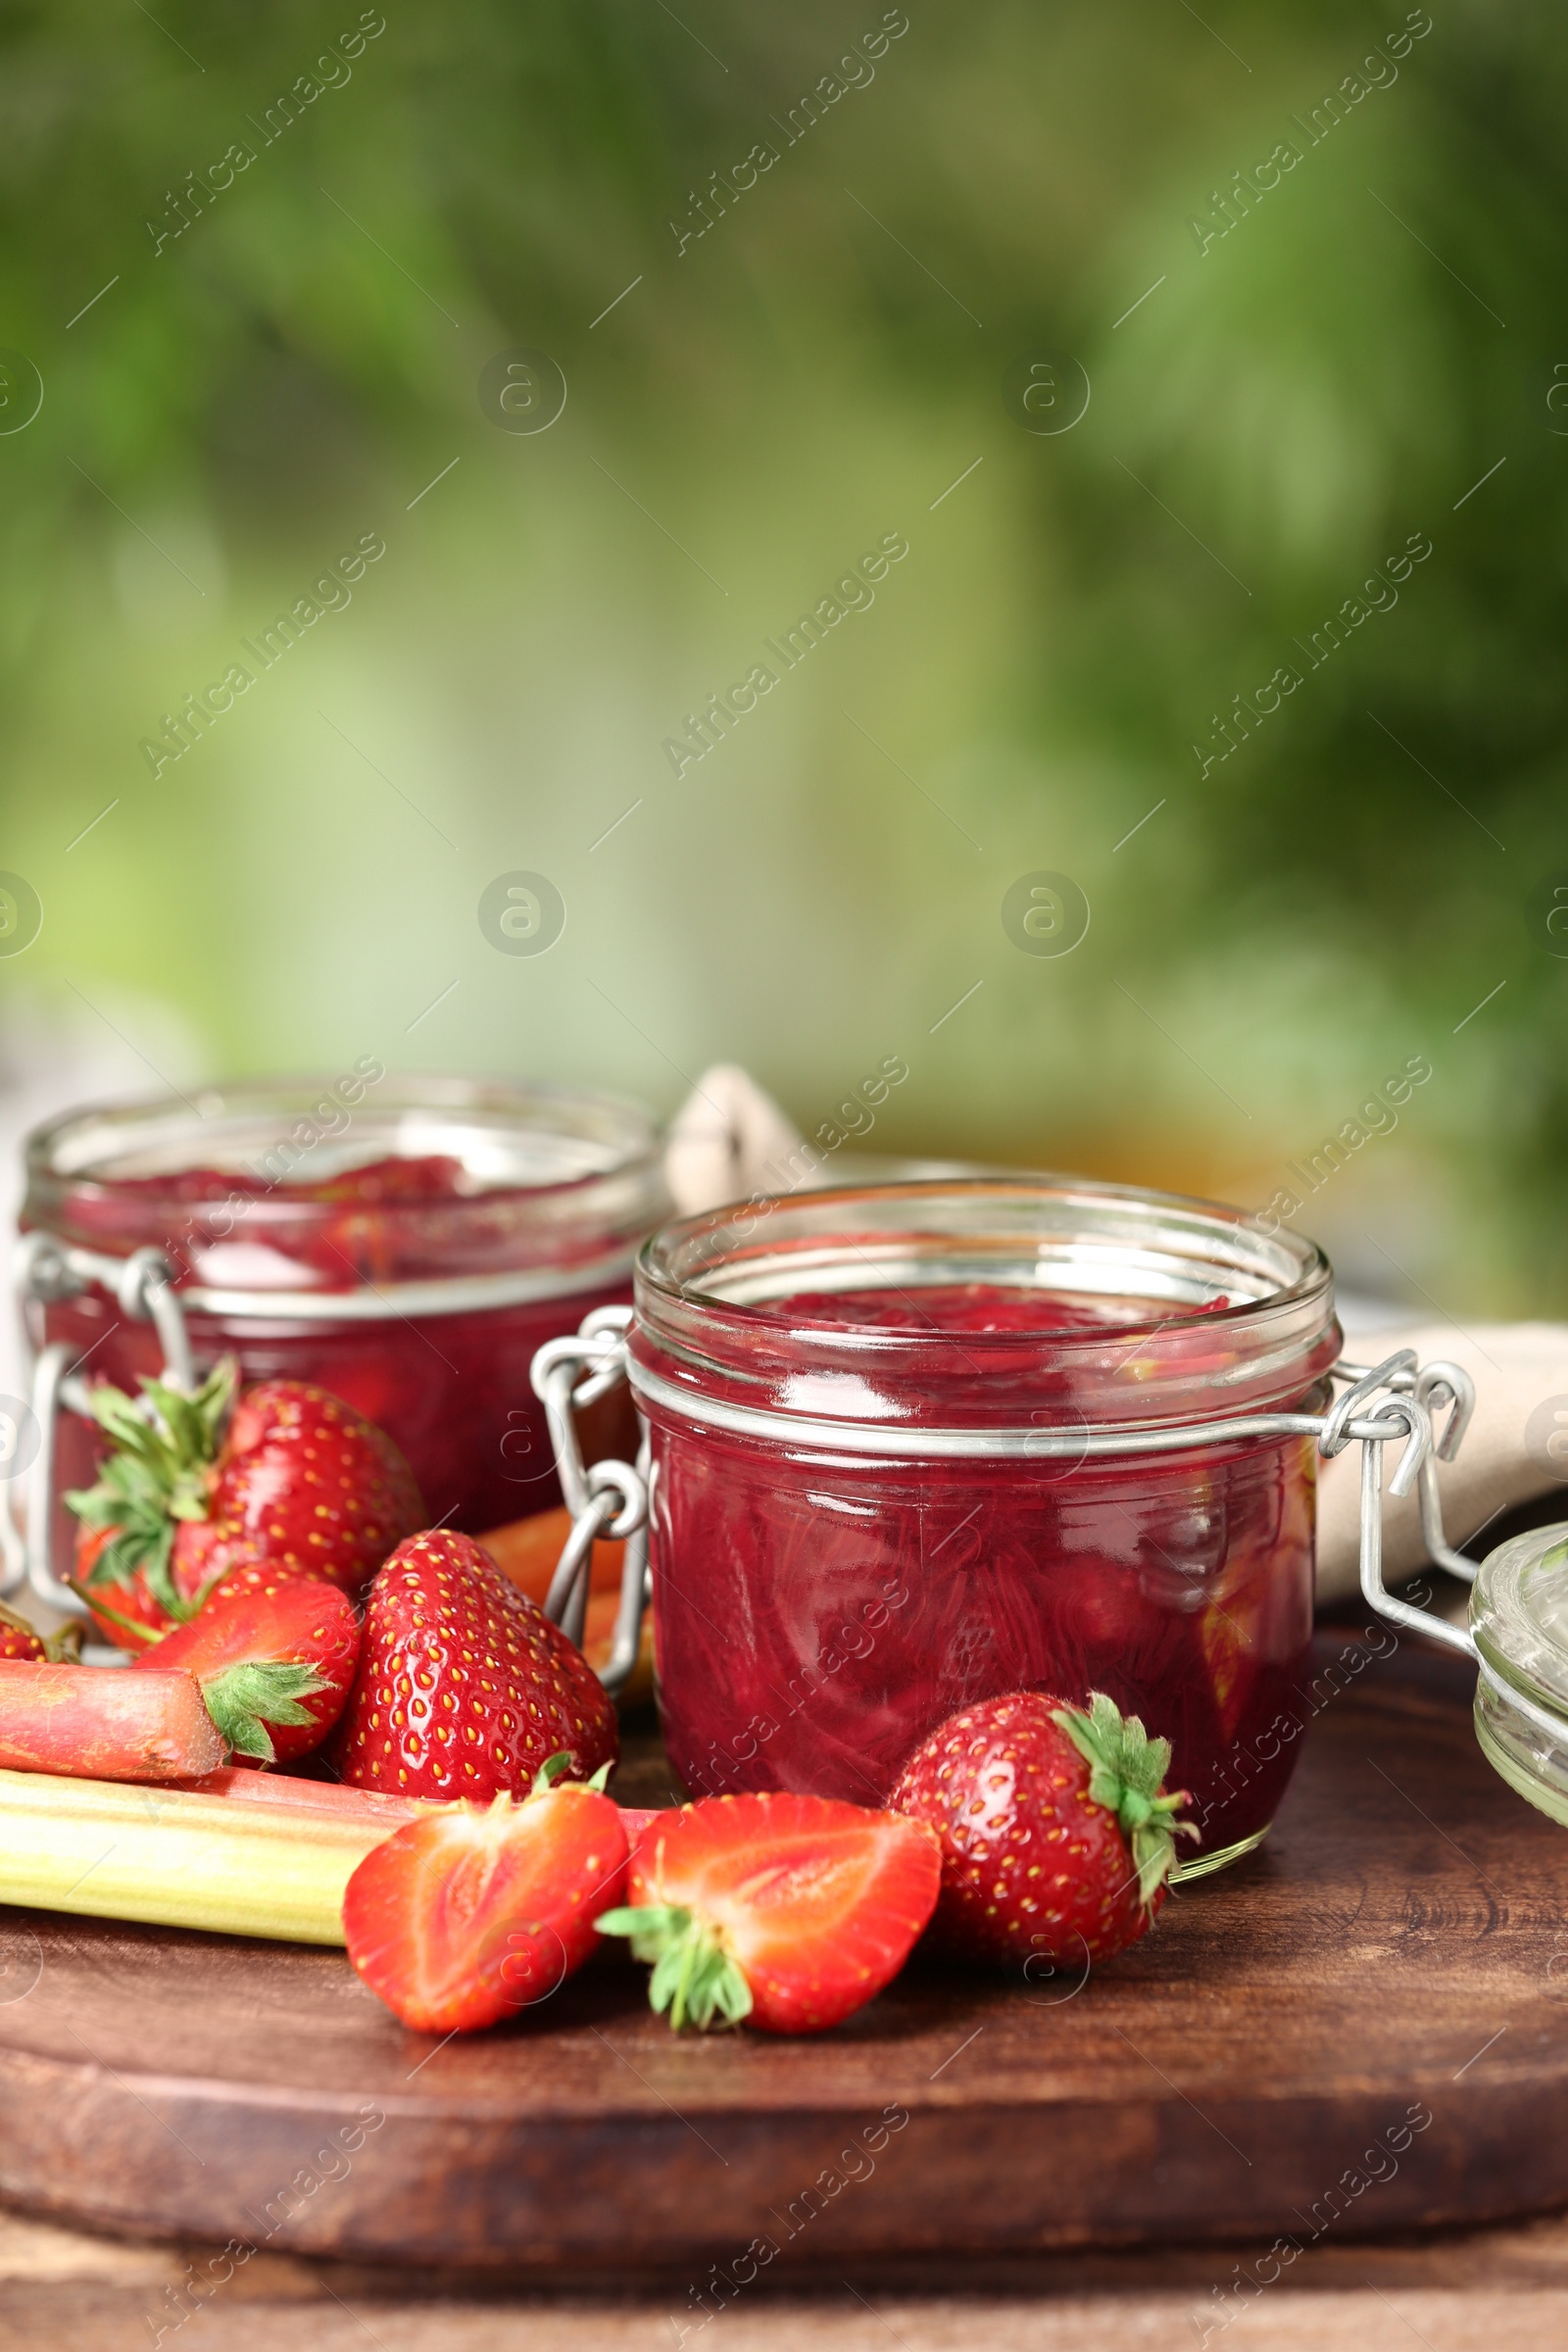 Photo of Tasty rhubarb jam in jars and strawberries on wooden table against blurred background. Space for text